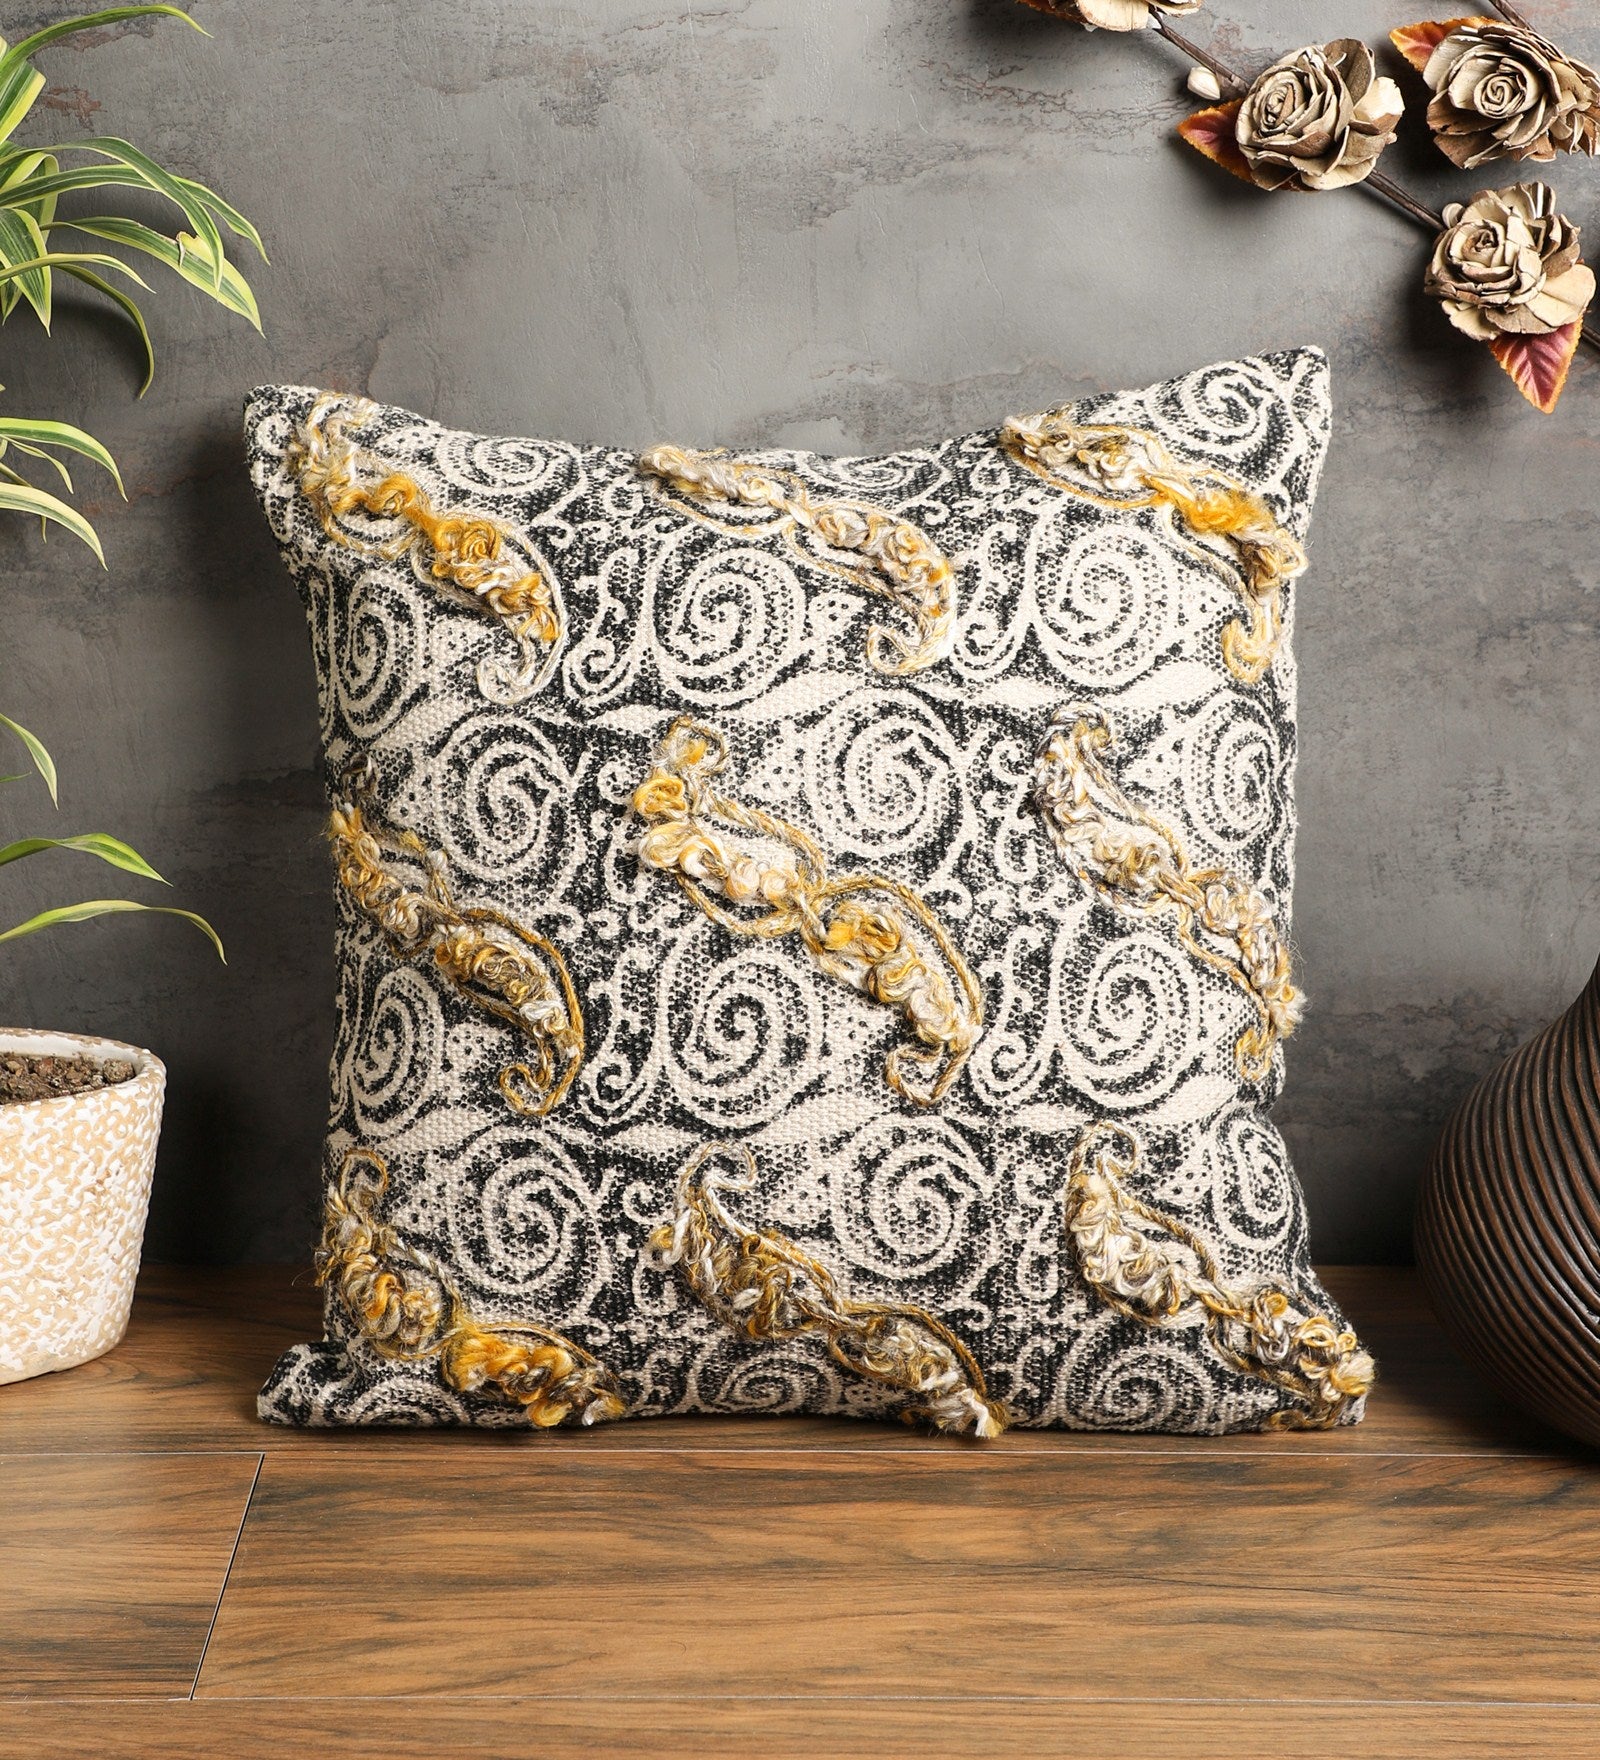 Embroidered Contemporary Cushion Cover (Beige-Black Swirls)